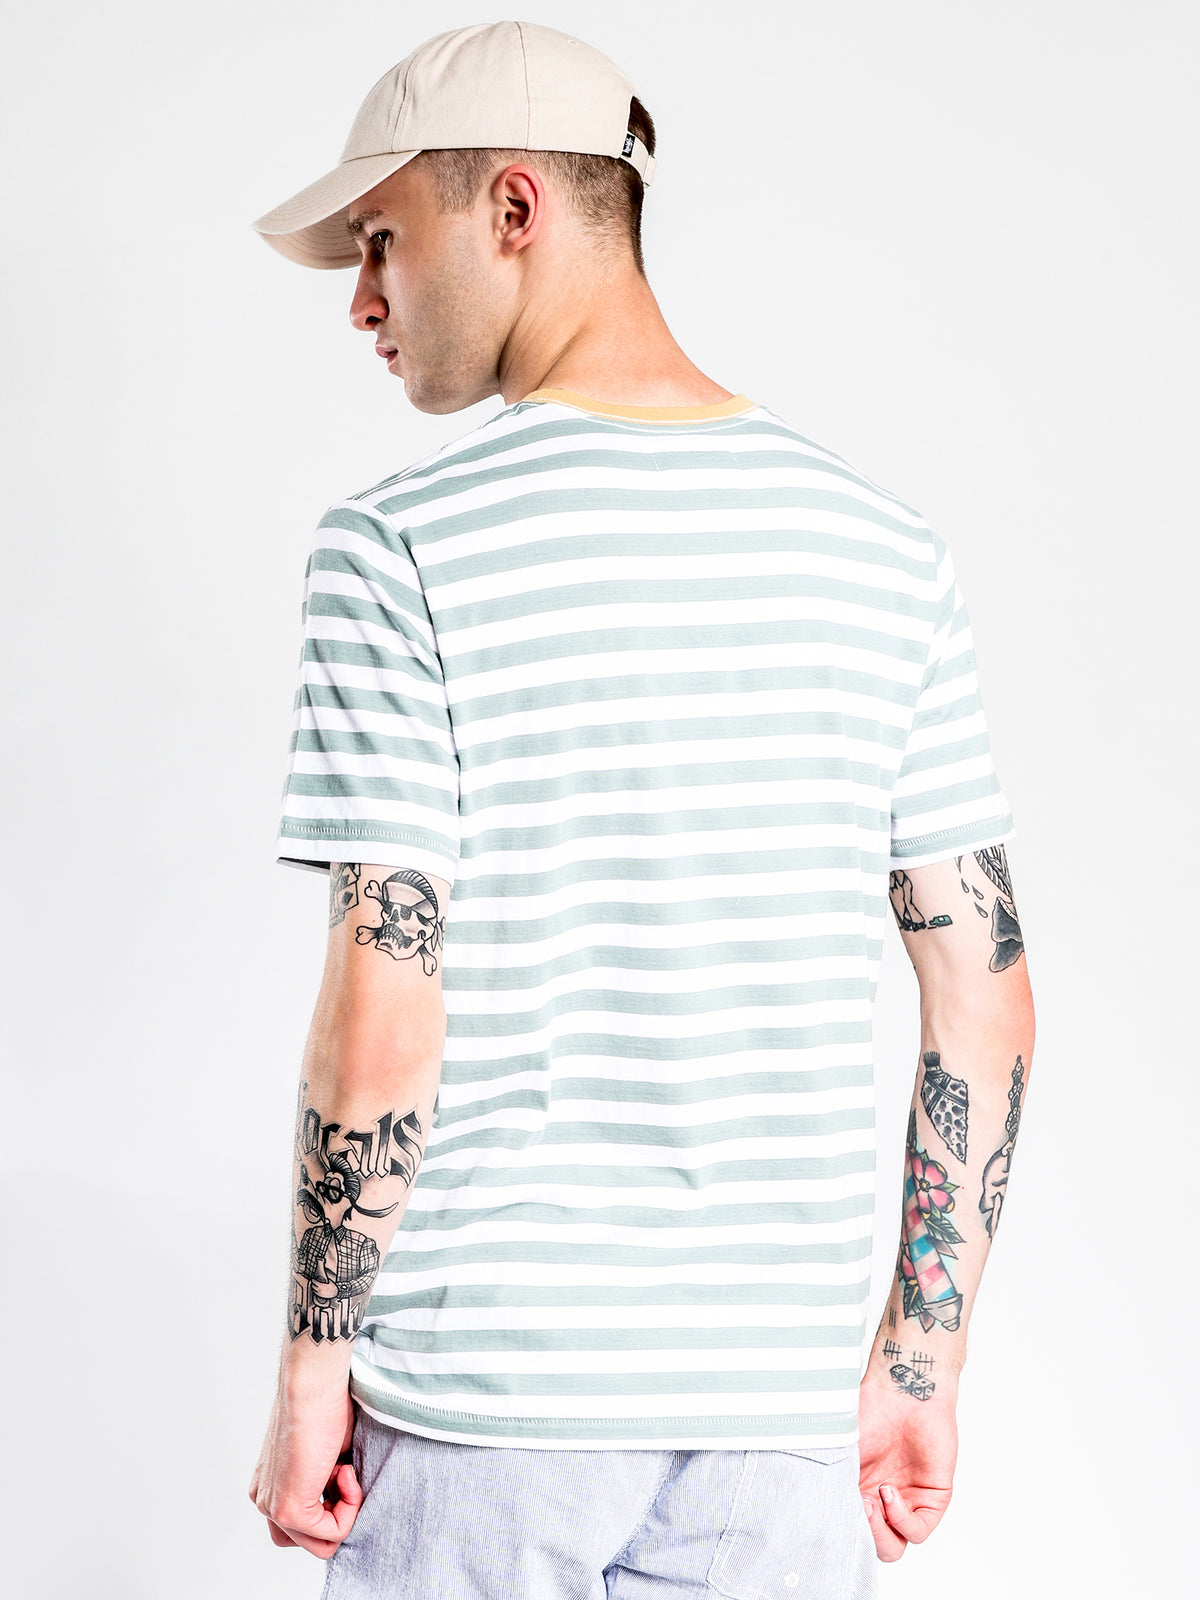 B Cools Retro T-Shirt in Teal &amp; White Stripe